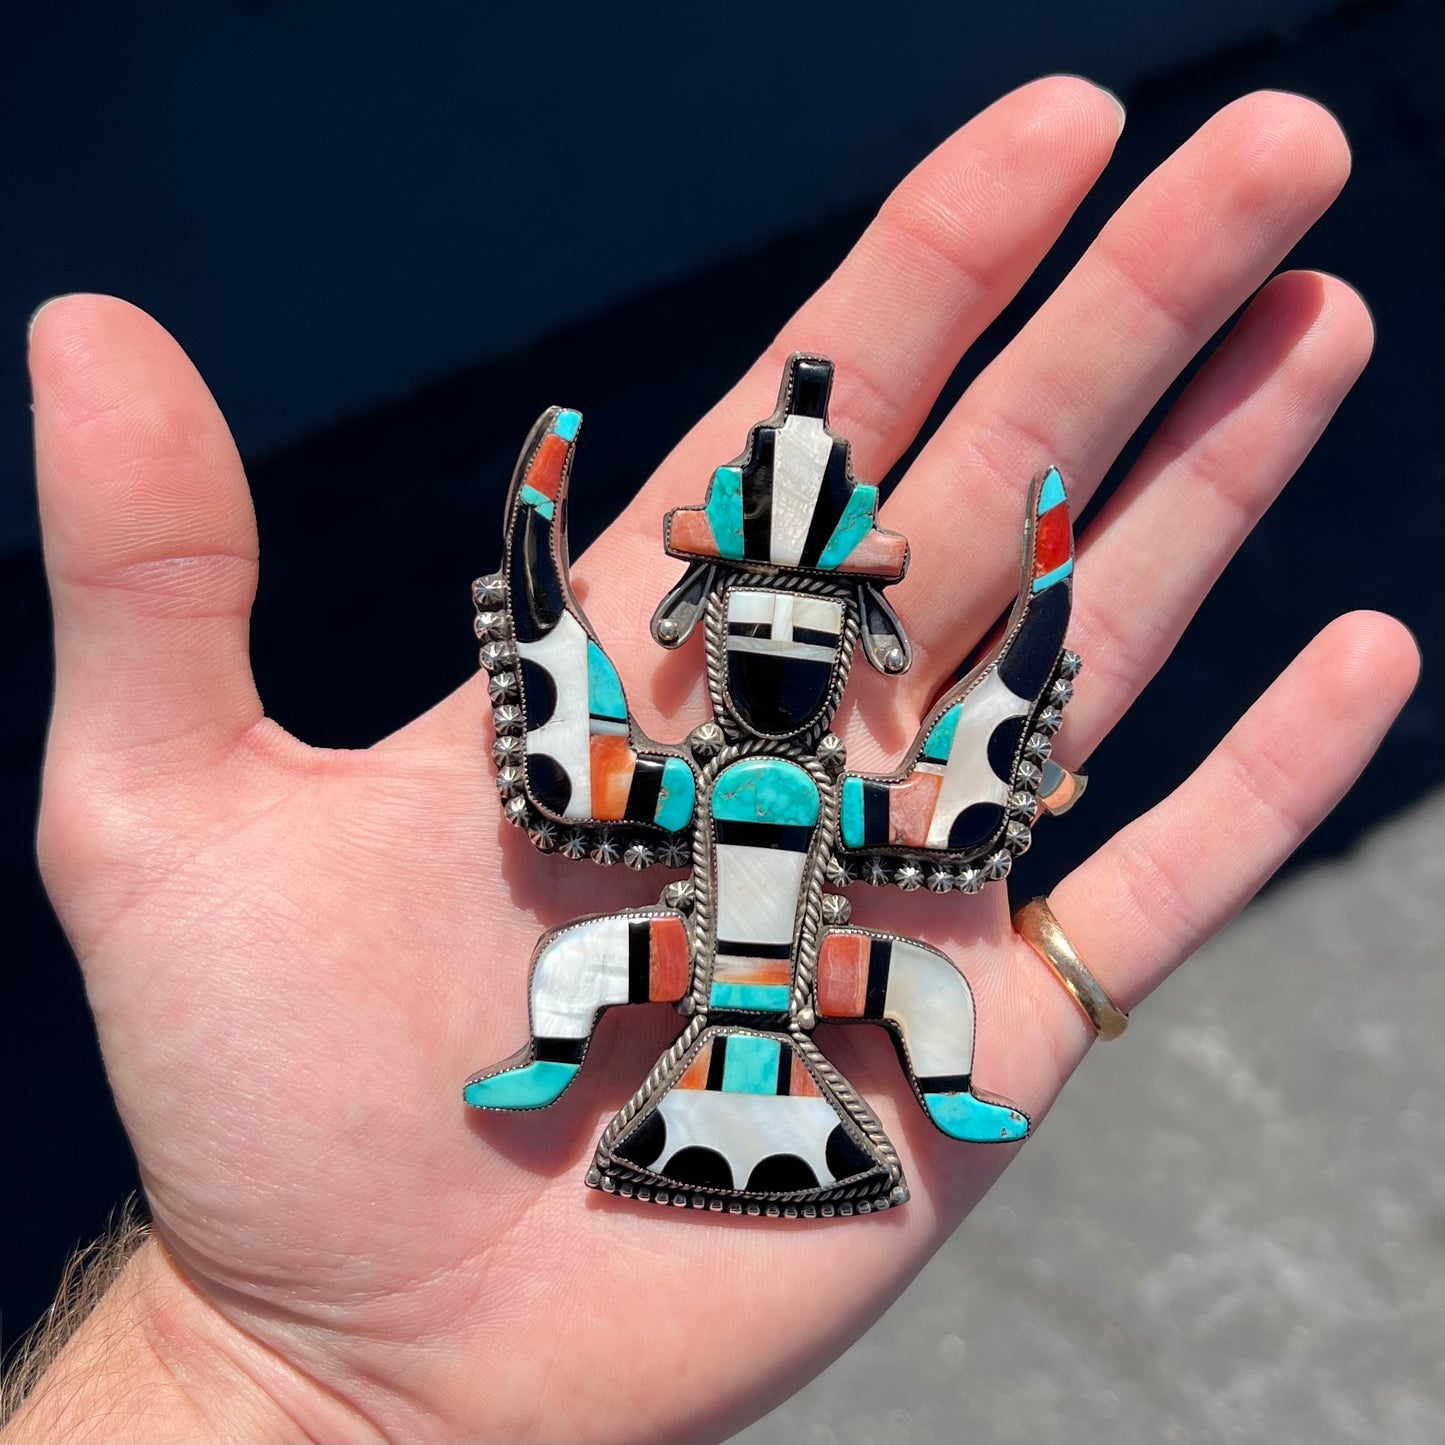 A silver, Zuni Indian dancing eagle necklace/pin.  The piece is inlaid with pieces of onyx, turquoise, coral, and mother of pearl.